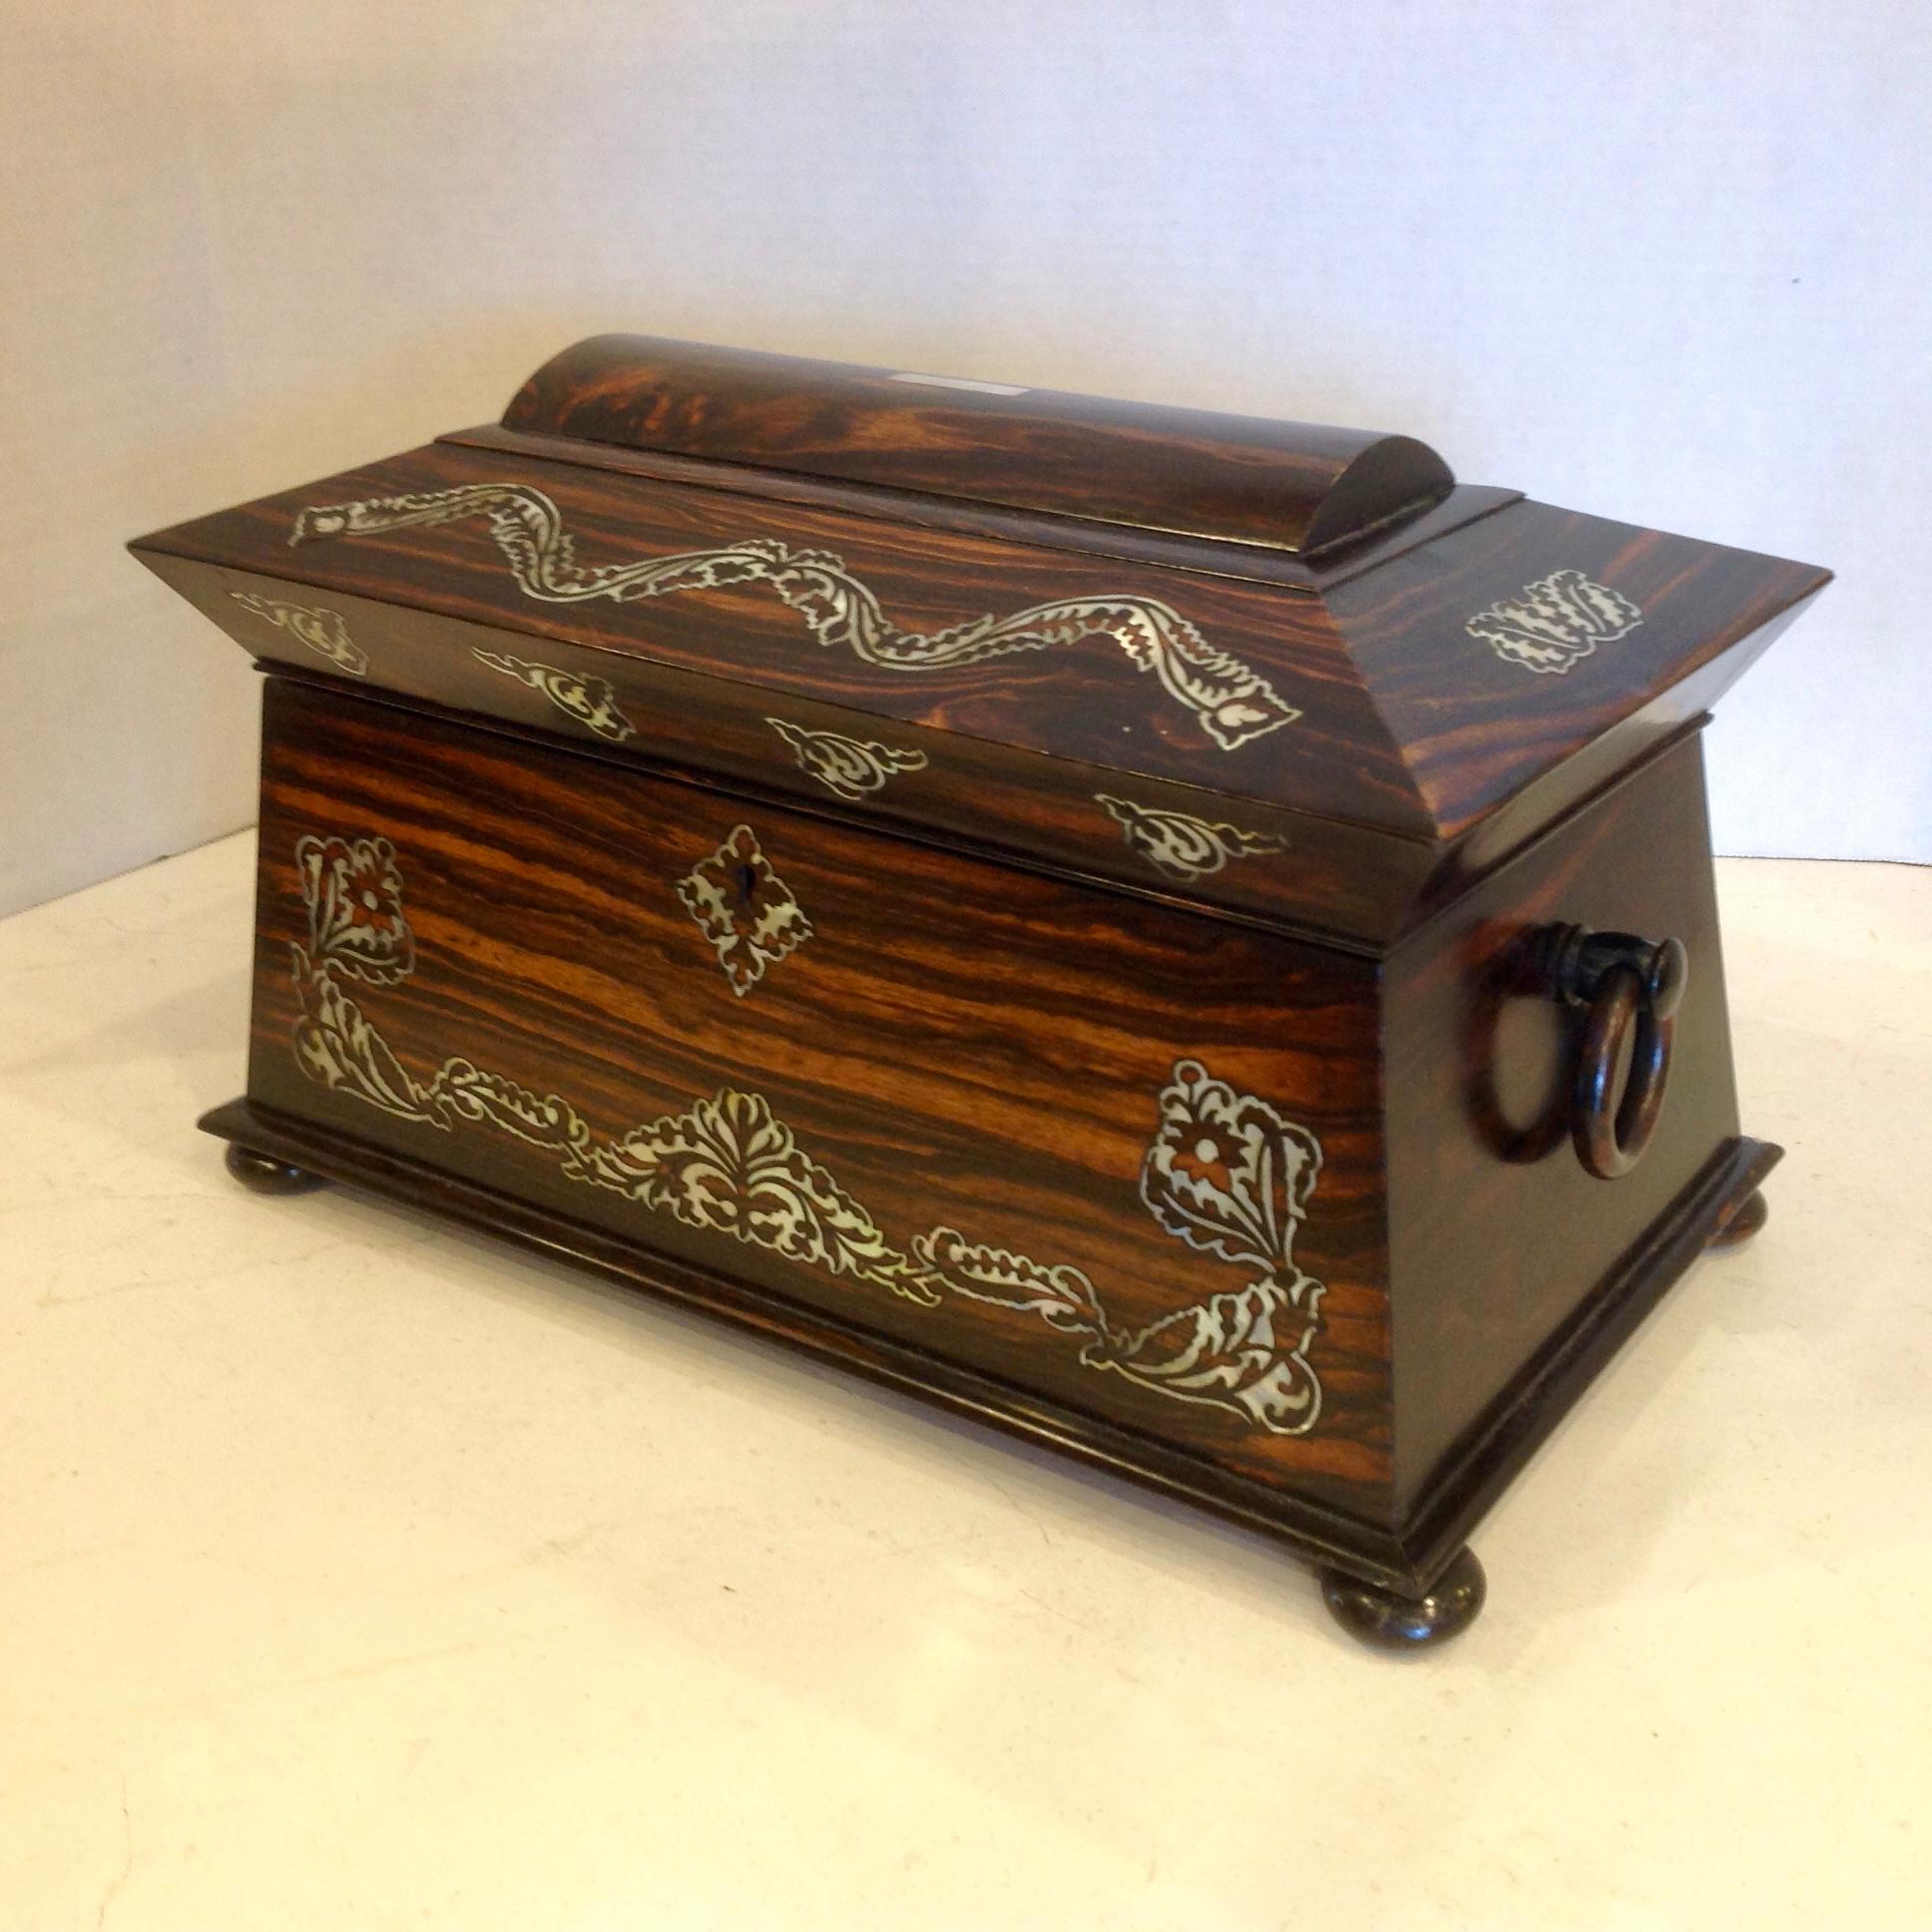 The quintessential rosewood caddy fashioned with a dome top and inlaid with mother of pearl.
Wood 